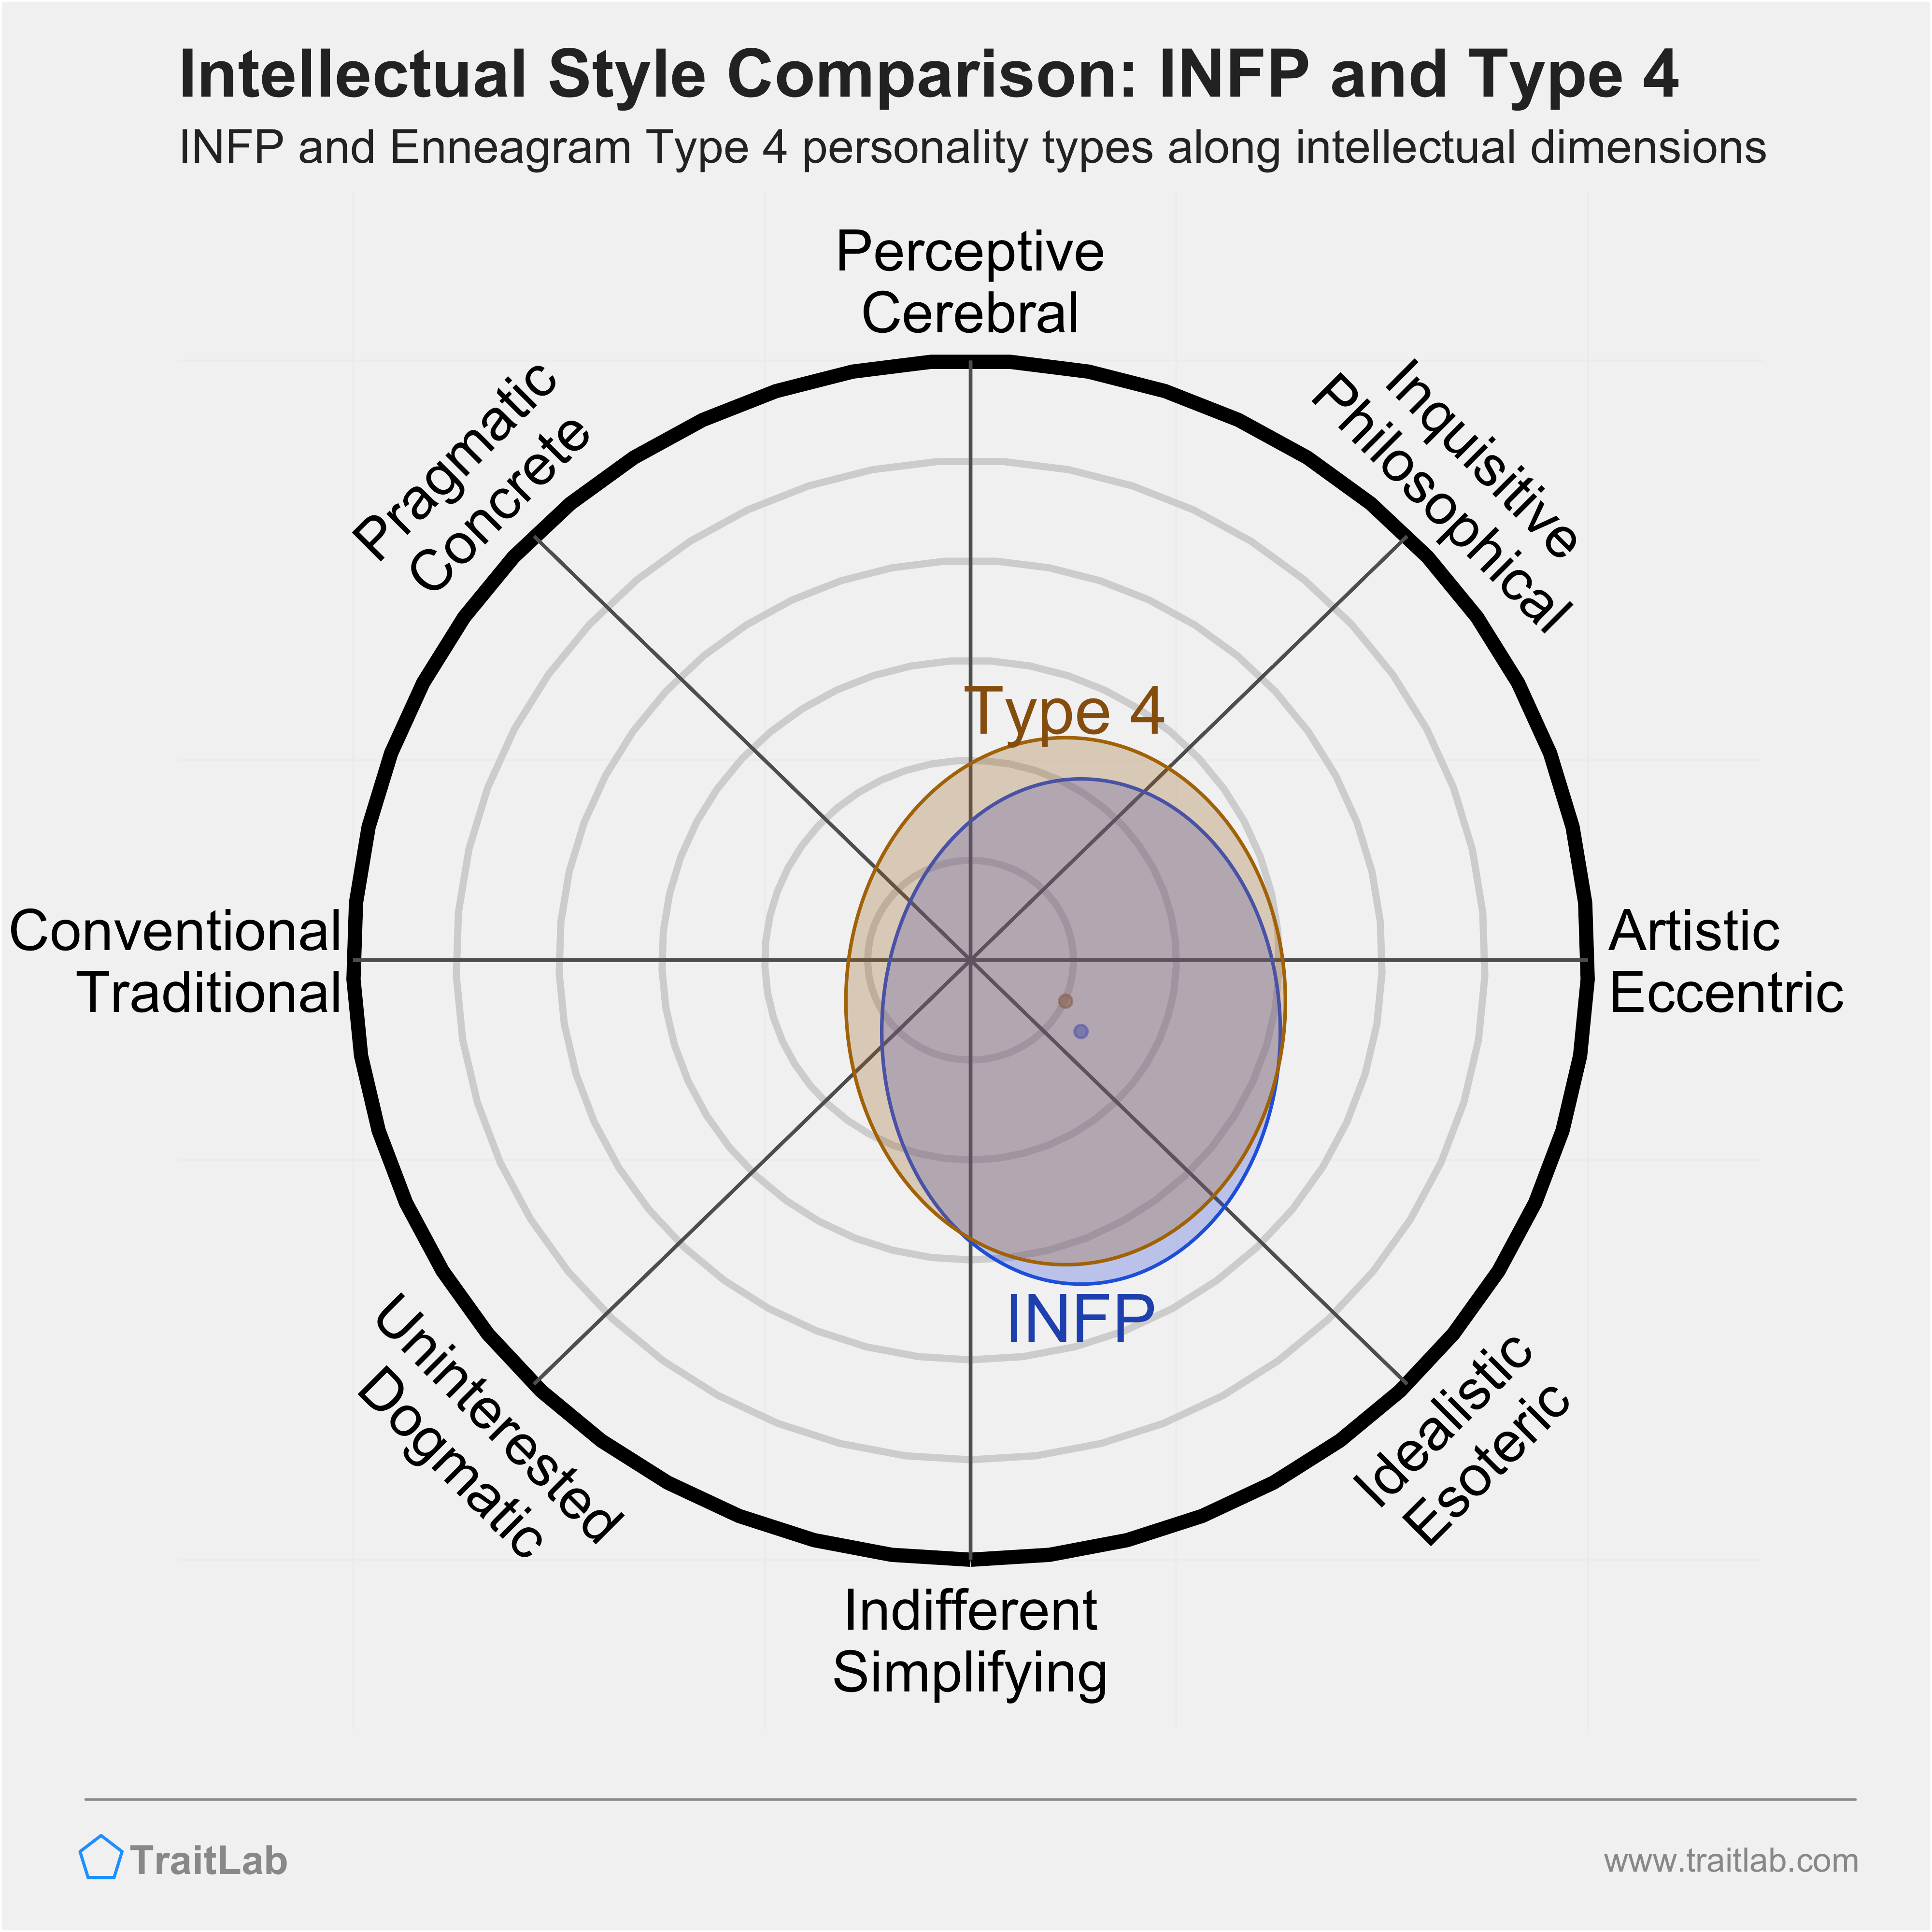 INFP and Type 4 comparison across intellectual dimensions